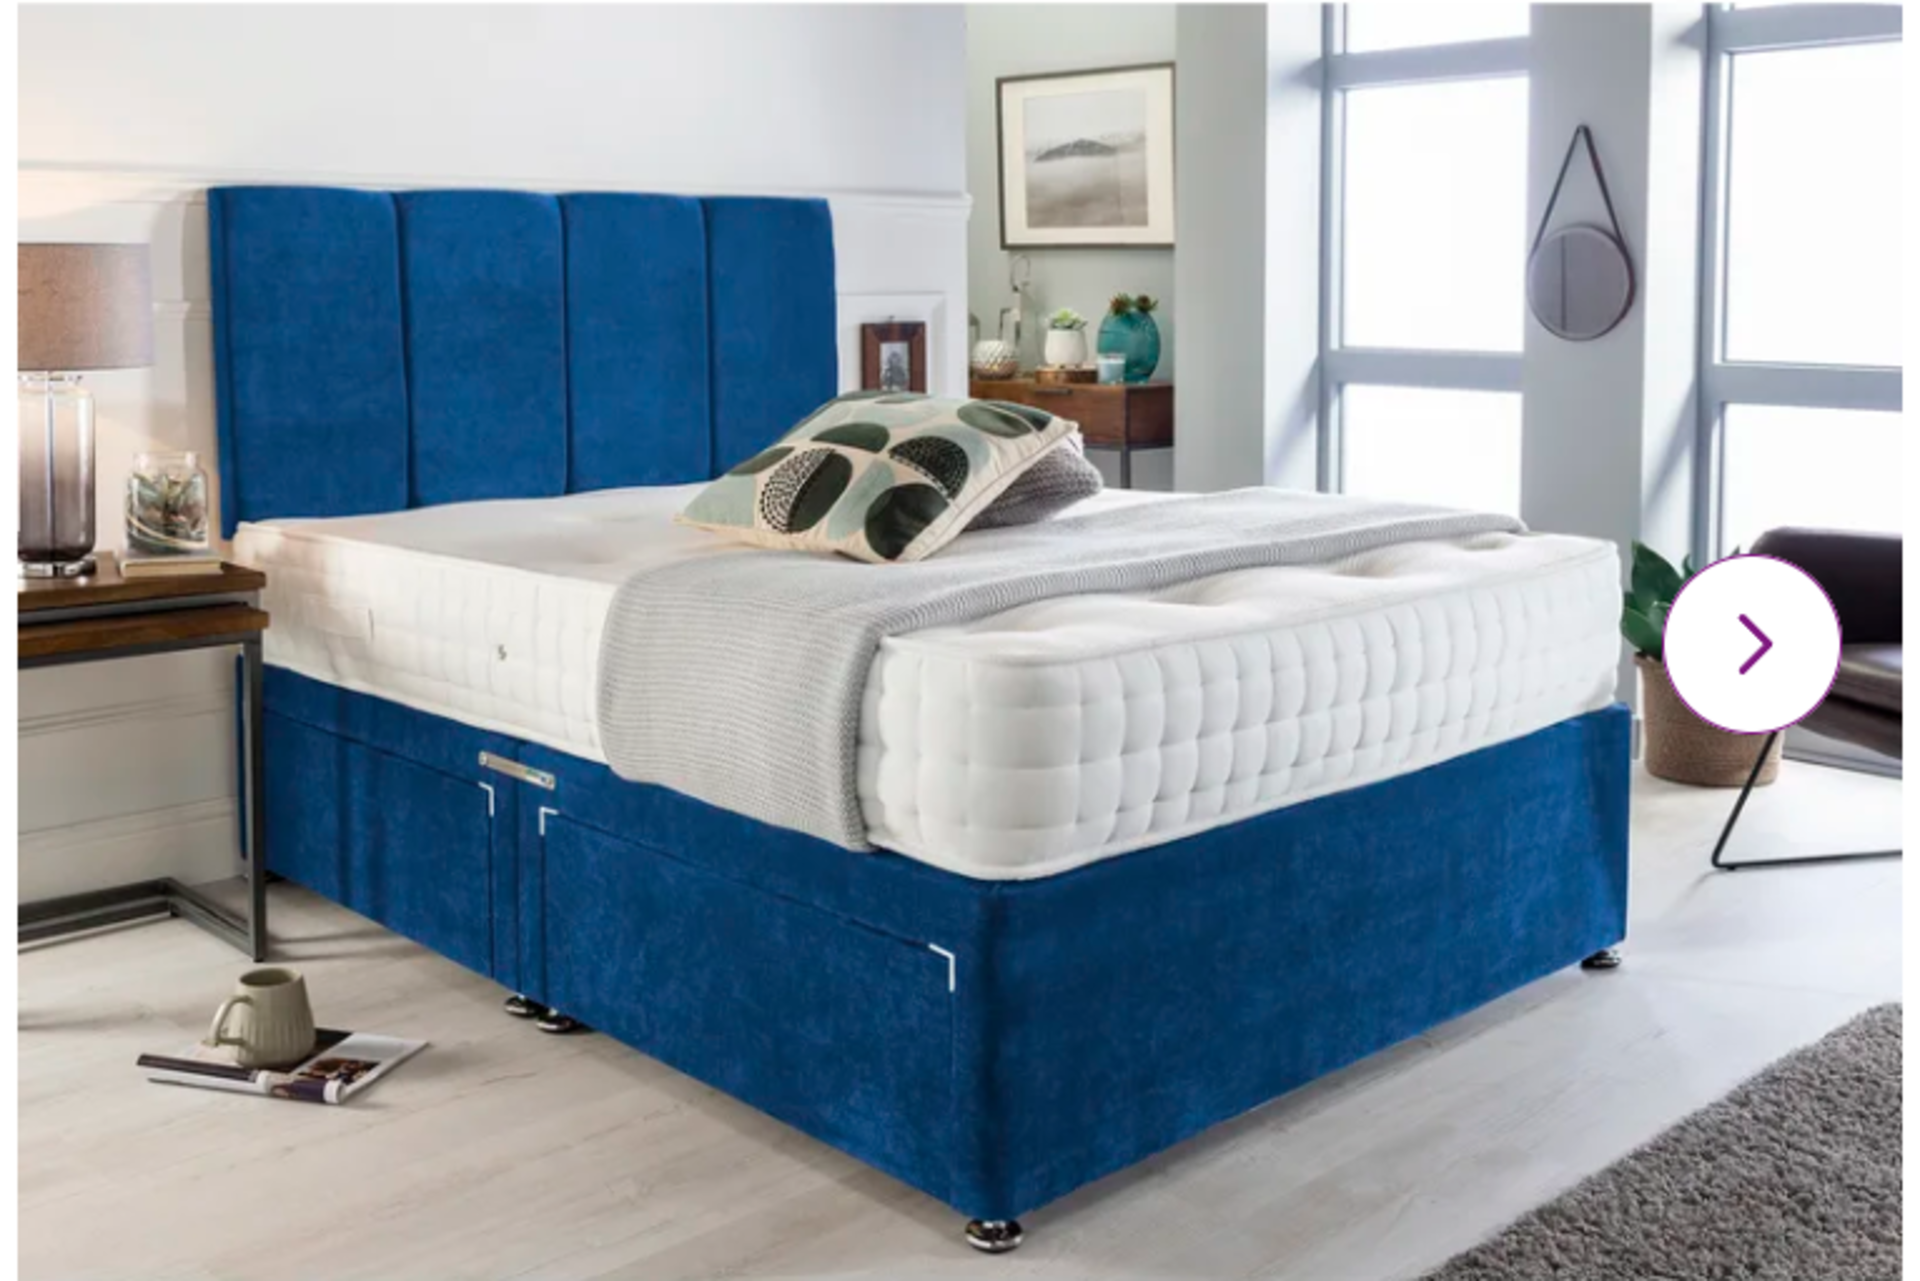 Higginson Divan Bed. RRP £449.99. Double. The bed comes complete with a 3 Tac open sprung mattress